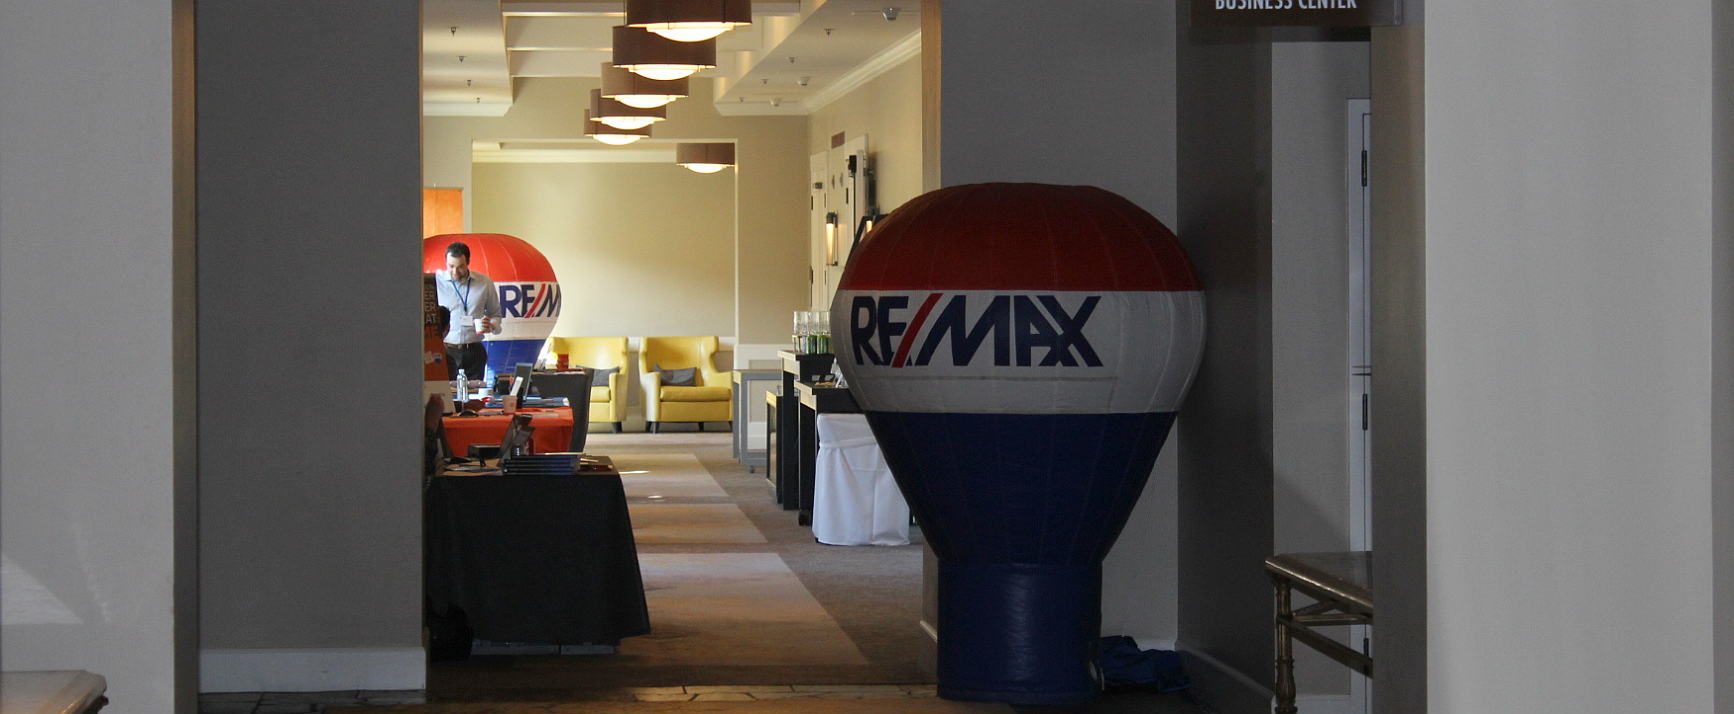 RE/MAX 6 Foot Cold Air Inflatables